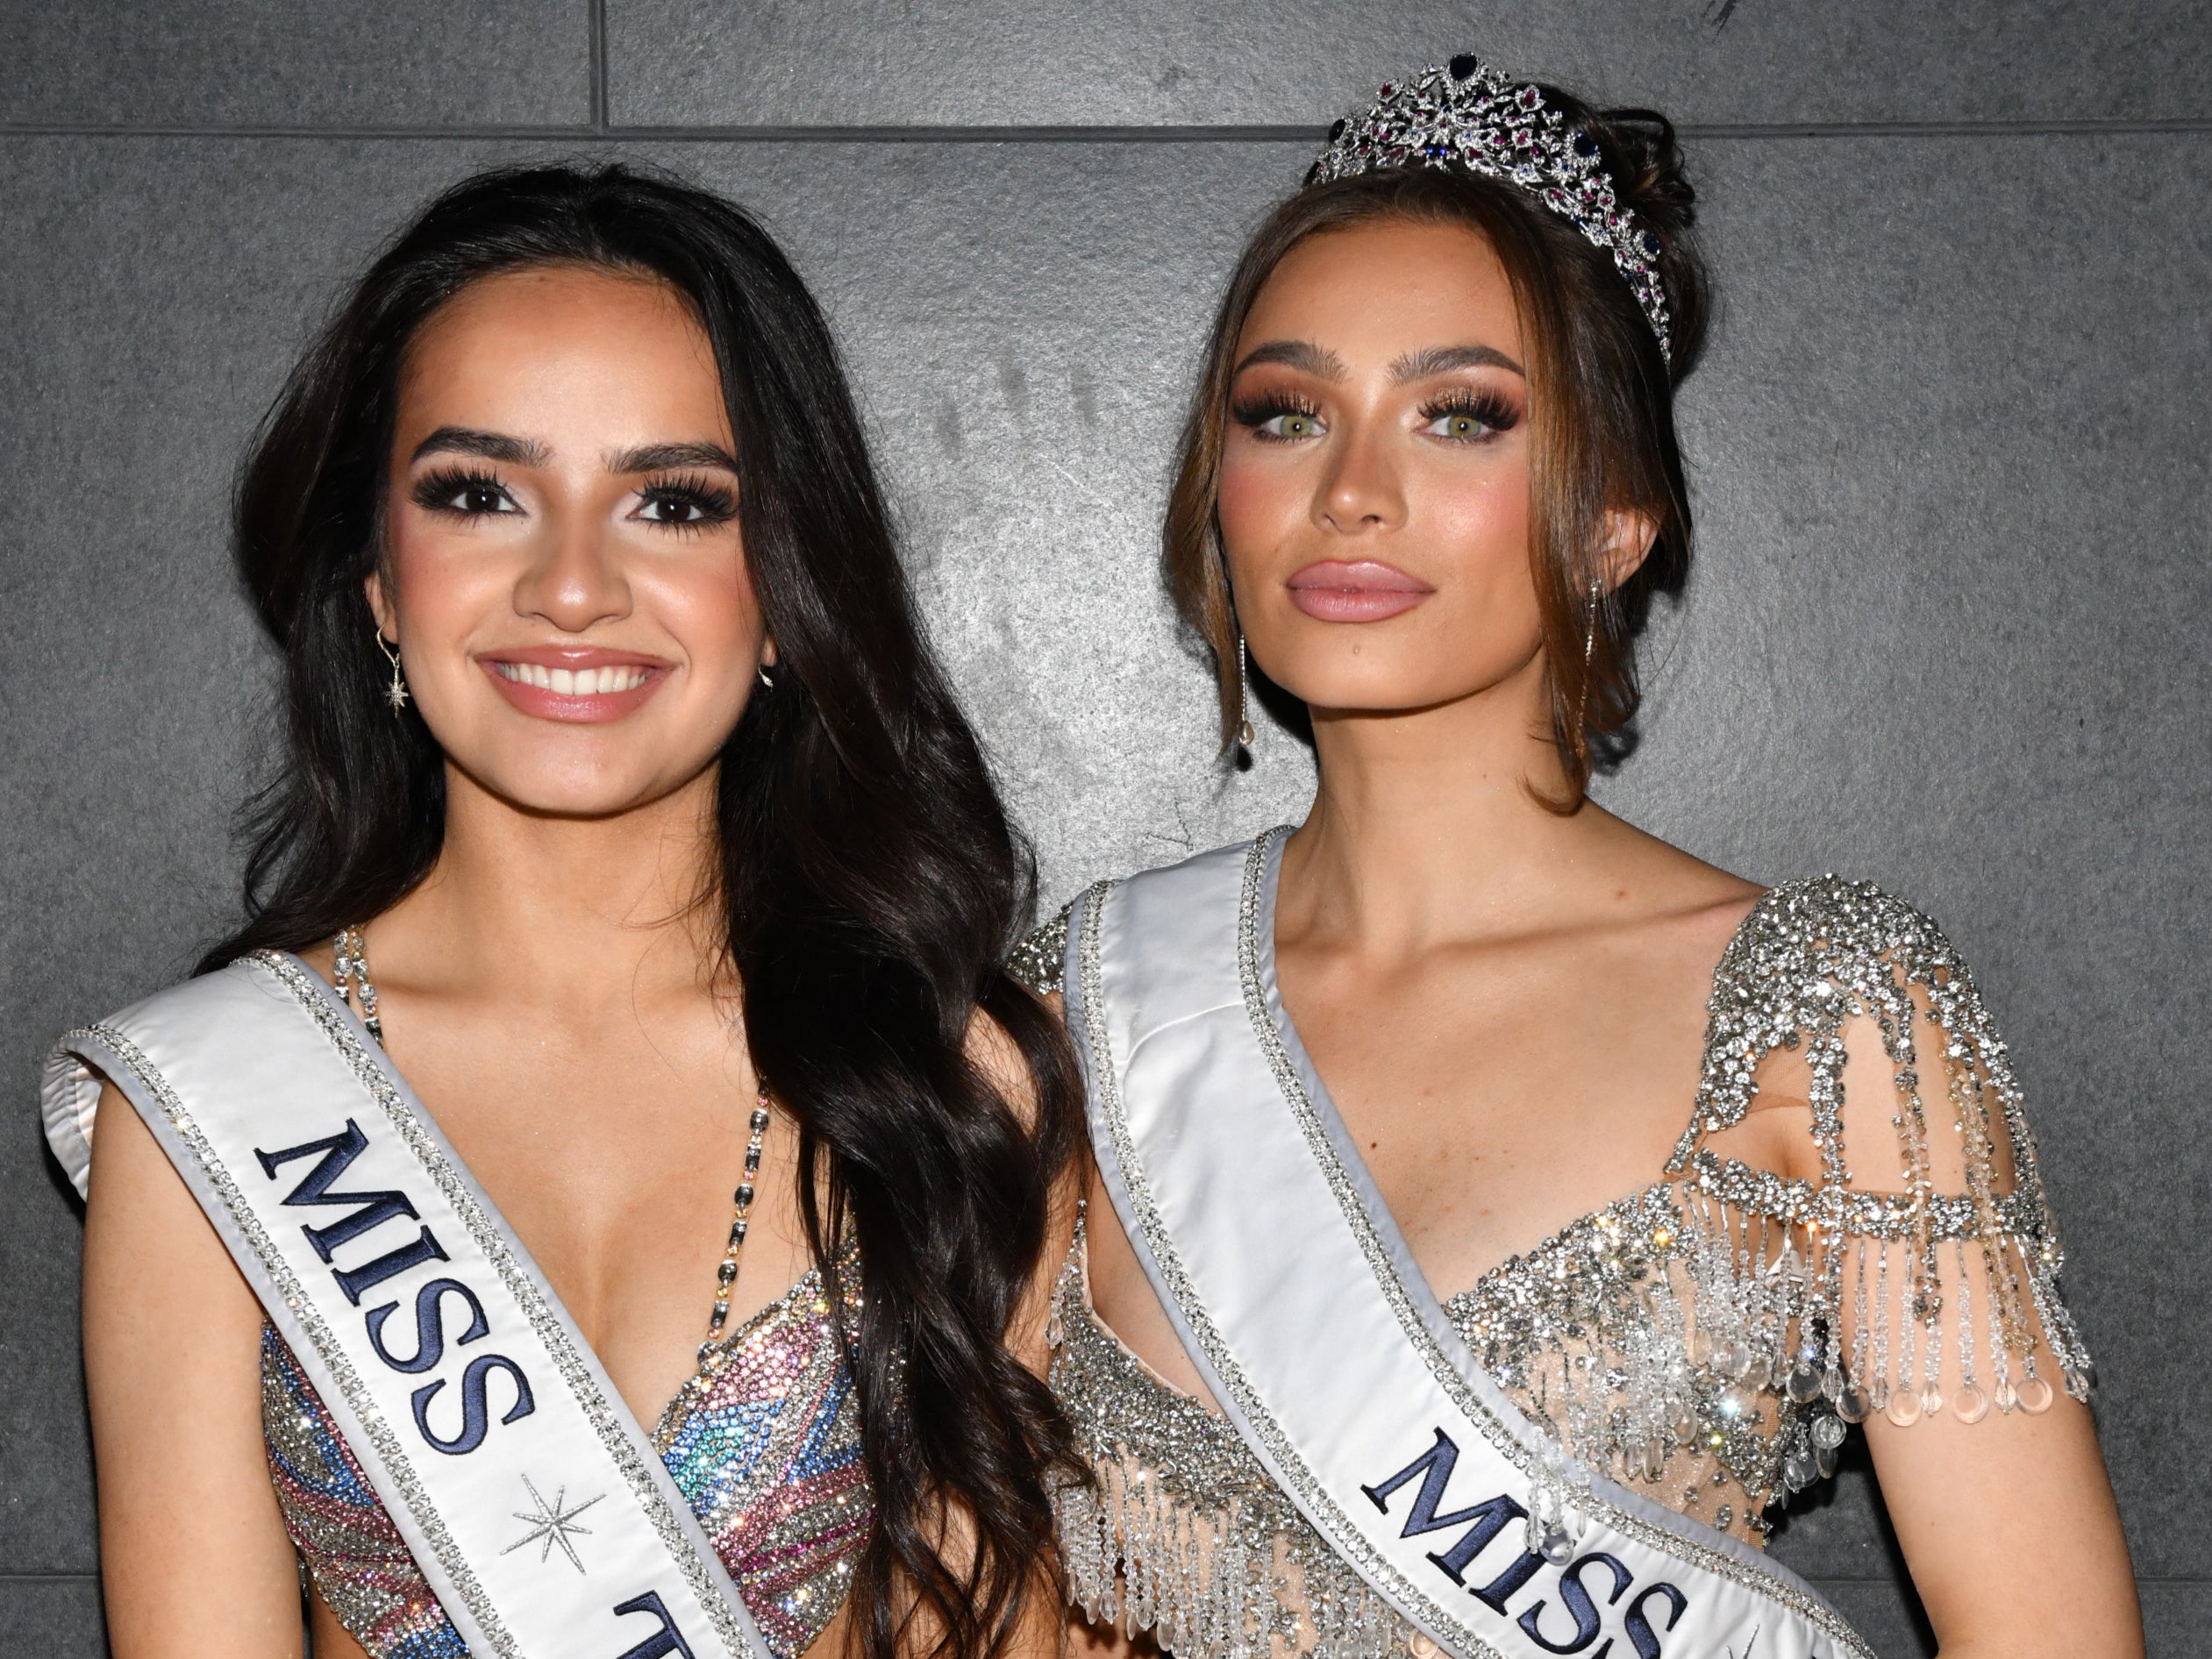 Miss Teen USA 2023, UmaSofia Srivastava, left, and Miss USA 2023, Noelia Voigt, right, recently both announced they would be resigning from their positions amid accusations of a toxic work environment